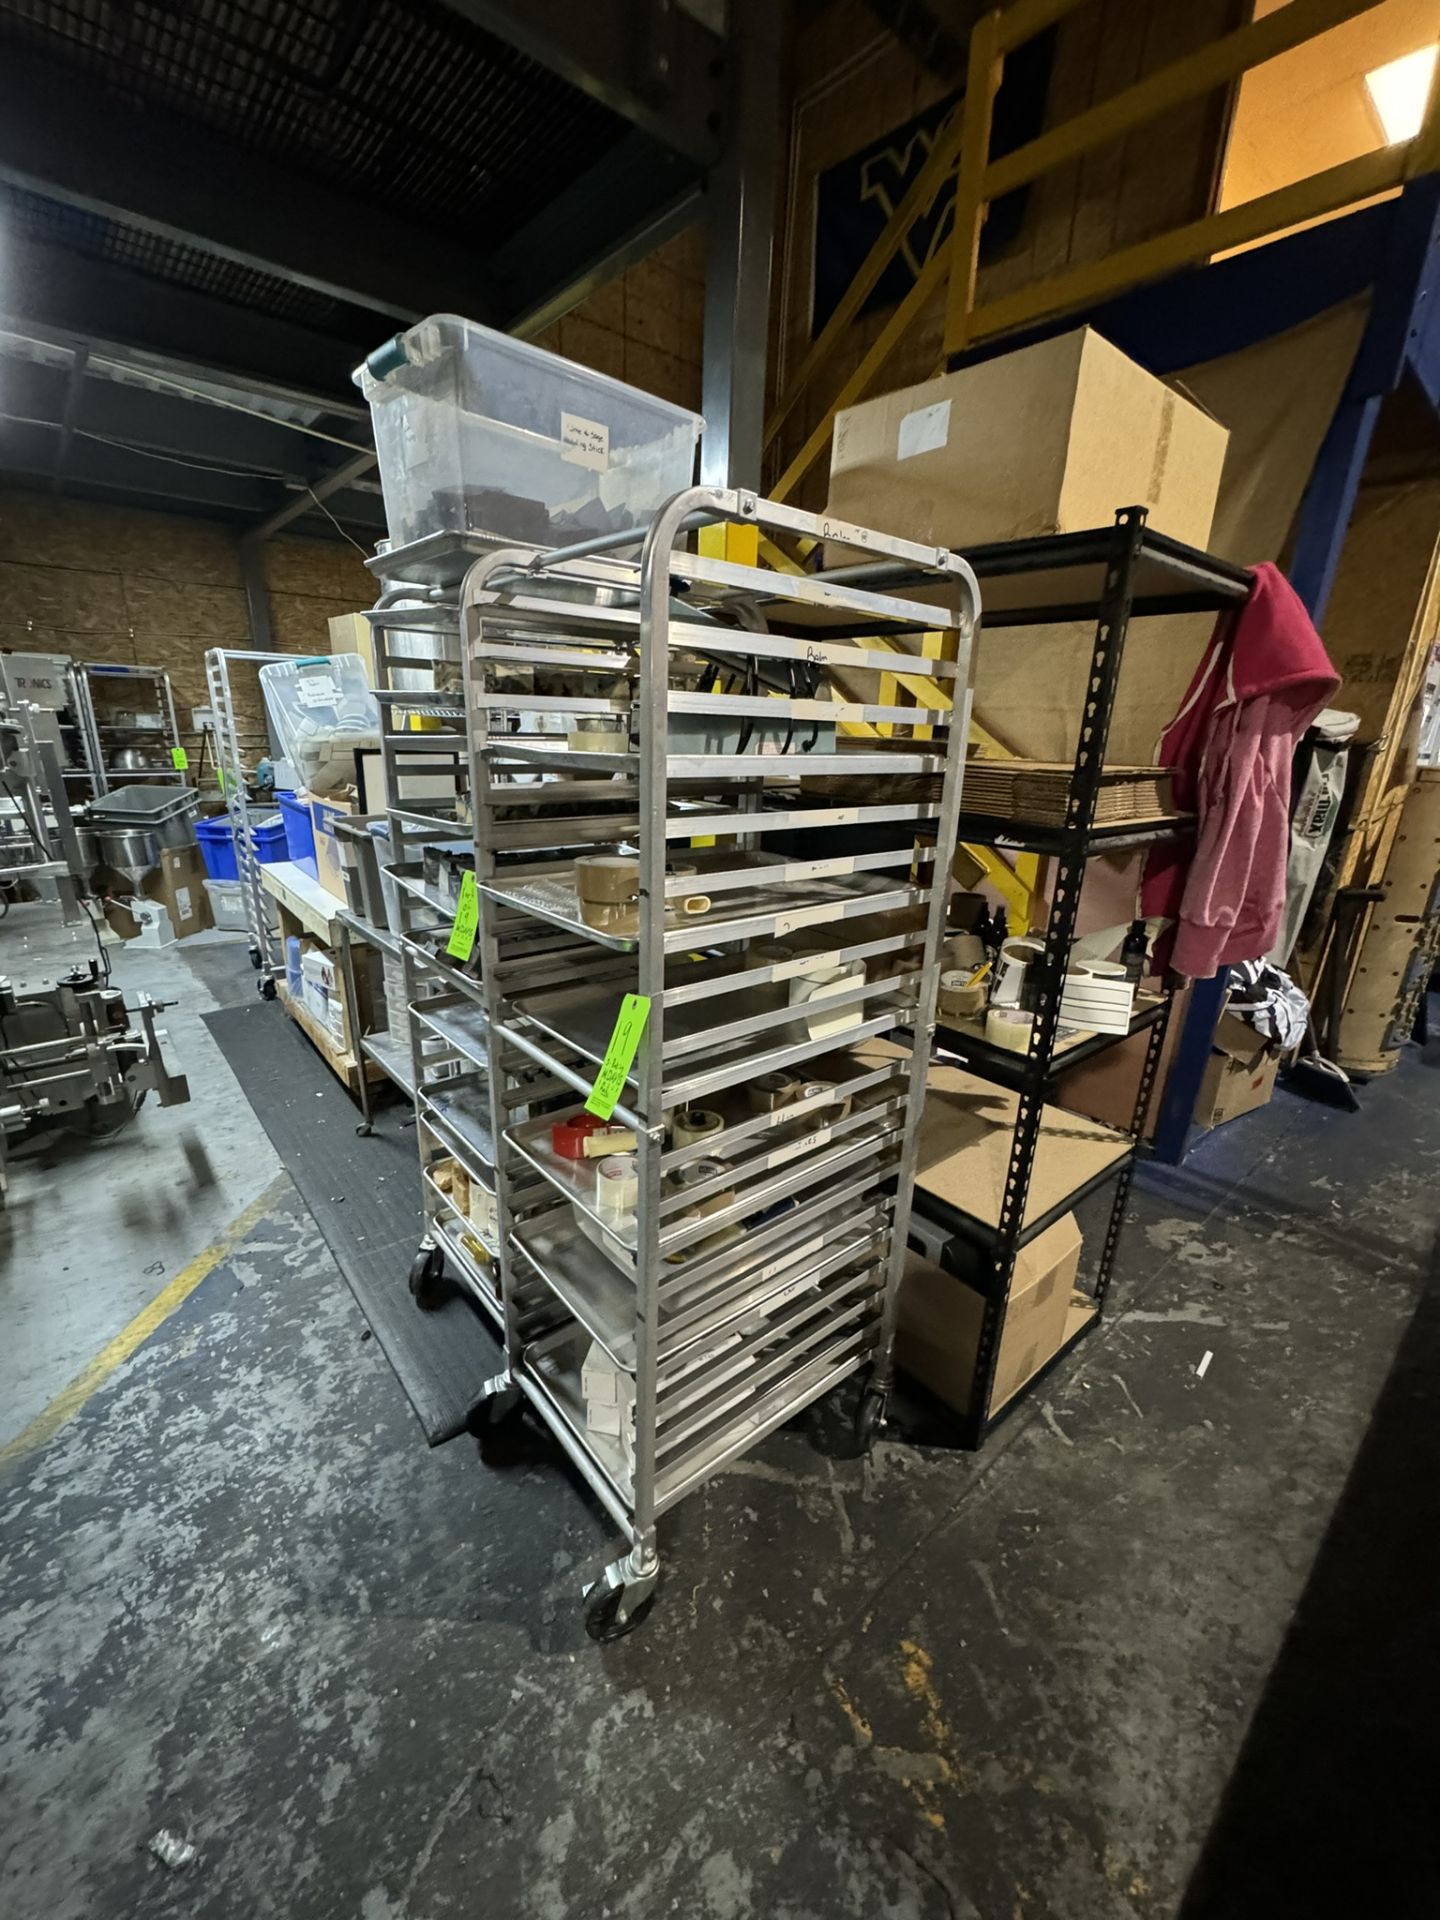 (2) Baking Rack, Overall Dims. Aprox. 26” L x 20” W x 69” H, Mounted on Casters (NOTE: Does Not